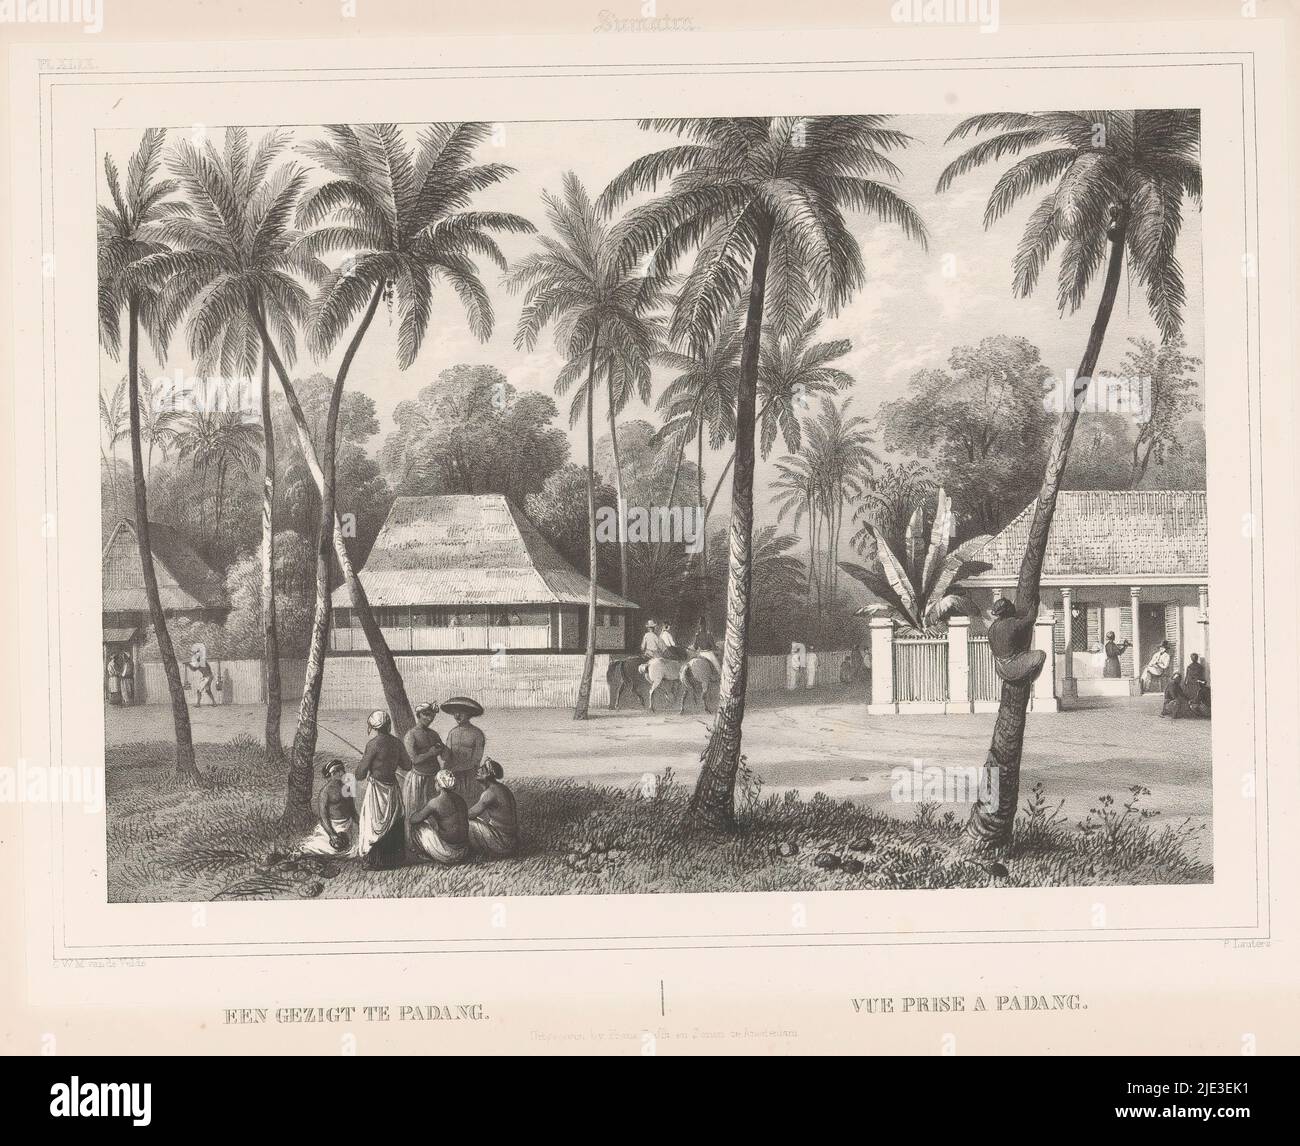 Street and houses in Padang, A view at Padang (title on object), Sumatra  (series title on object), Gezigten uit Neêrlands Indië (series title on  object), Between the trees men stand and sit